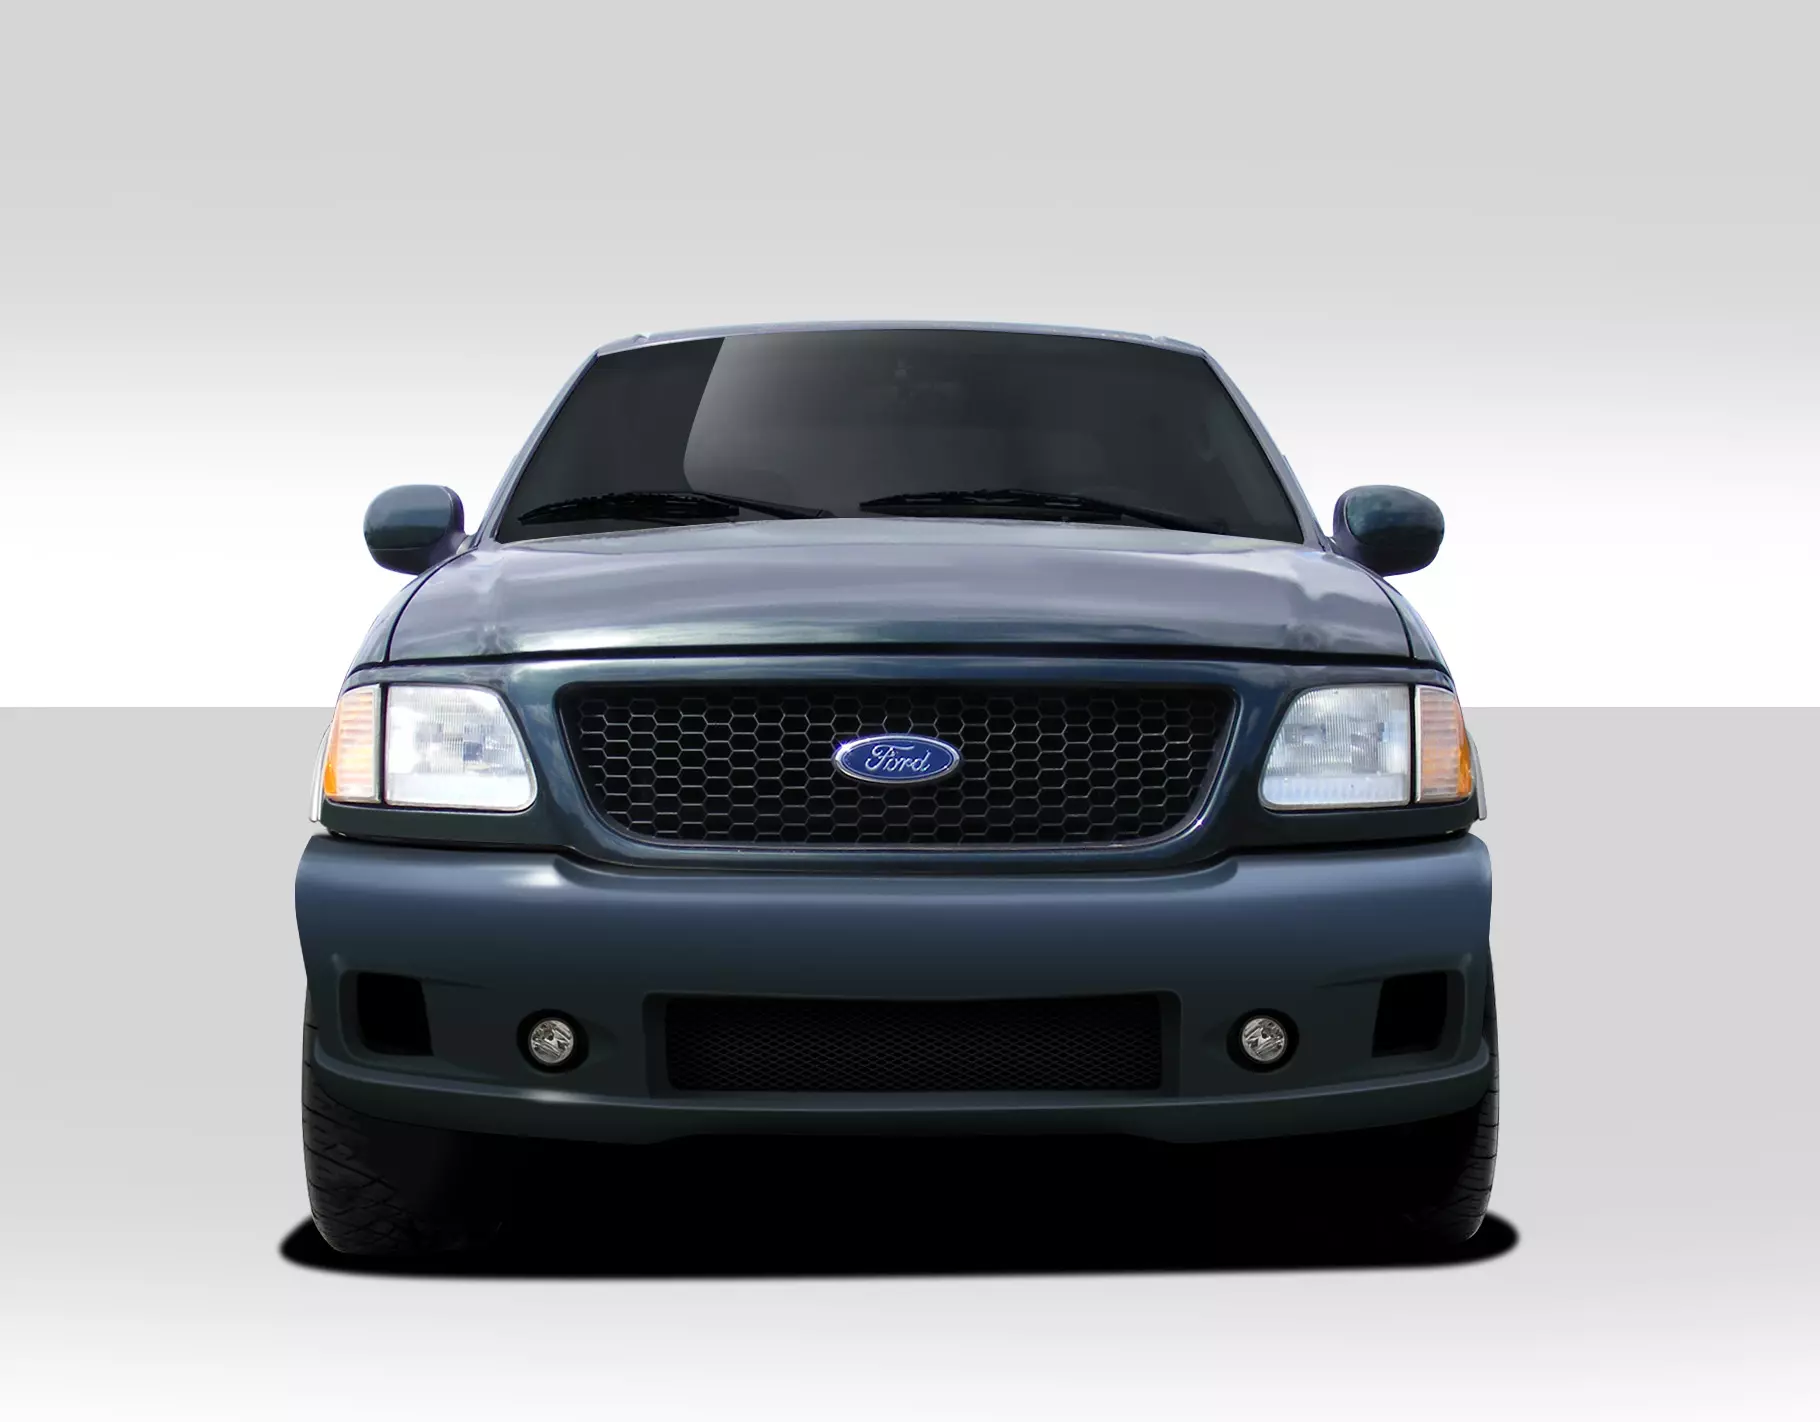 1997-2003 Ford F-150 / 1997-2002 Ford Expedition Duraflex BT-2 Front Bumper Cover 1 Piece - Image 1